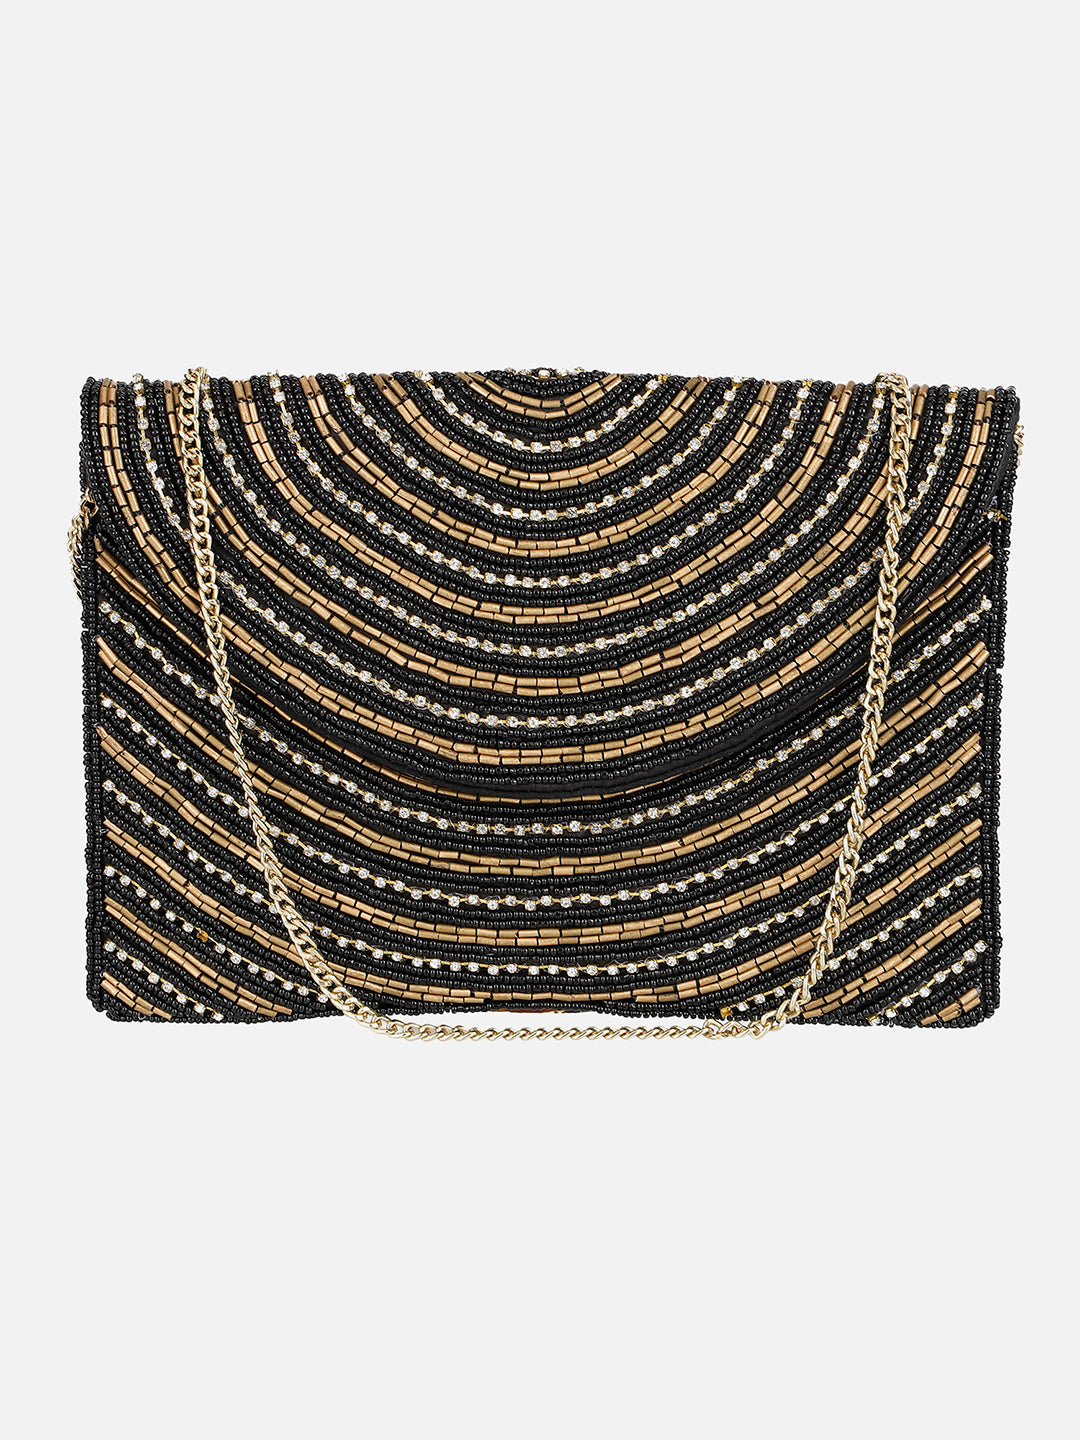 Embroidered Black and Golden Clutch Aditi Wasan